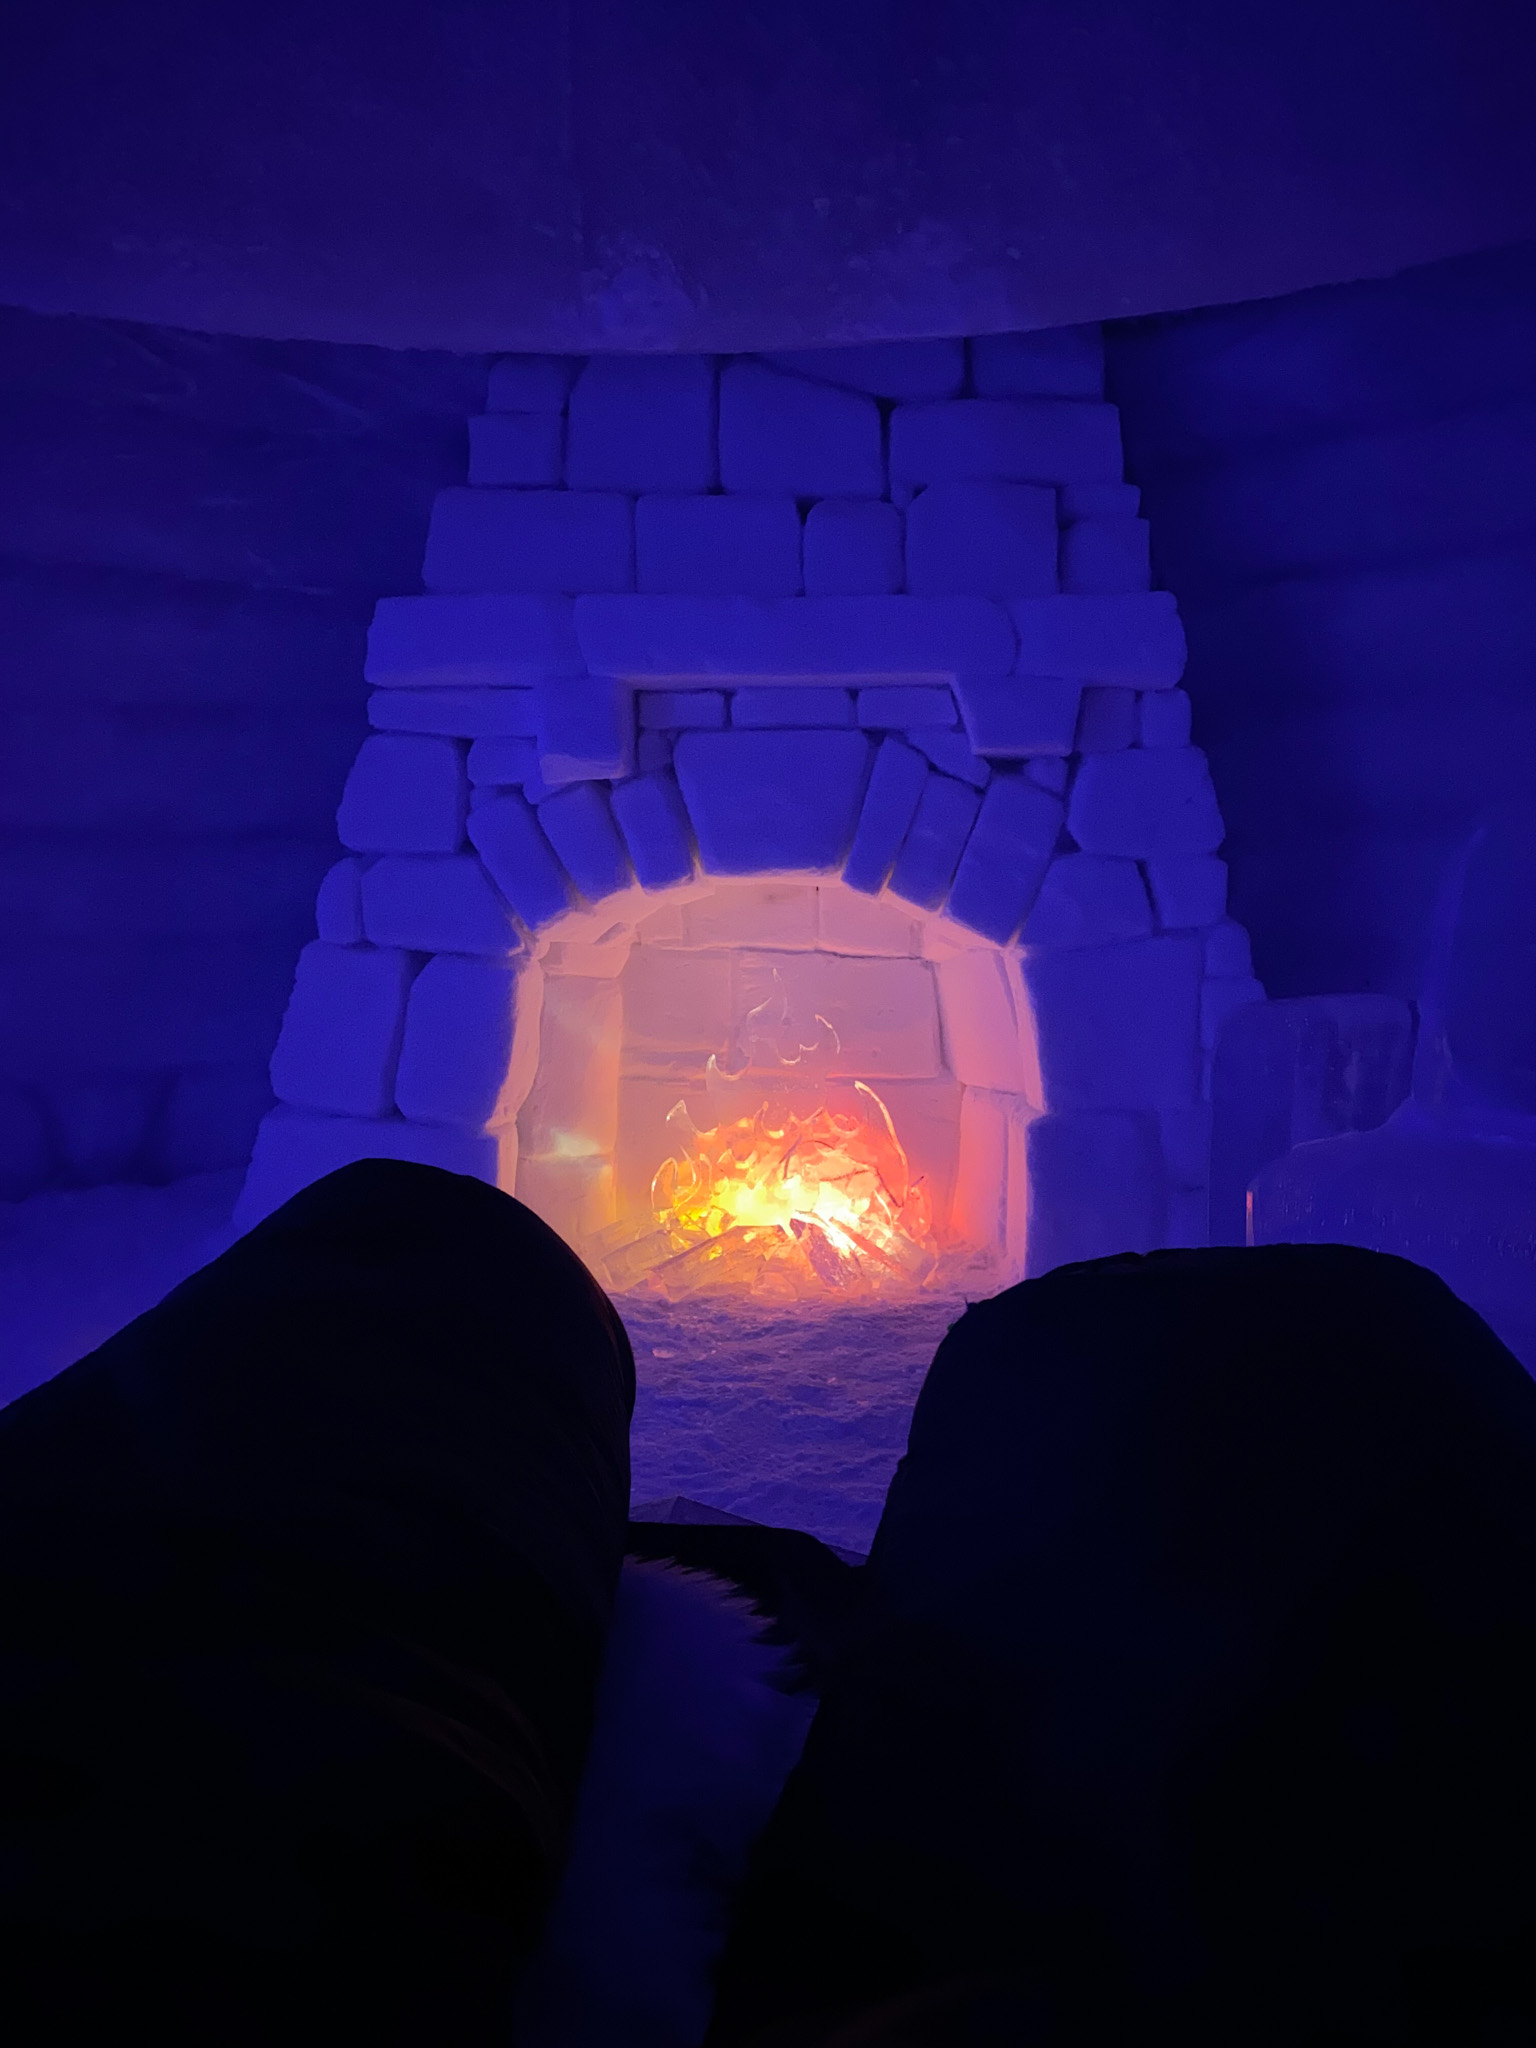 the "fireplace" made of snow and ice in our room at the Snowhotel in Kirkenes